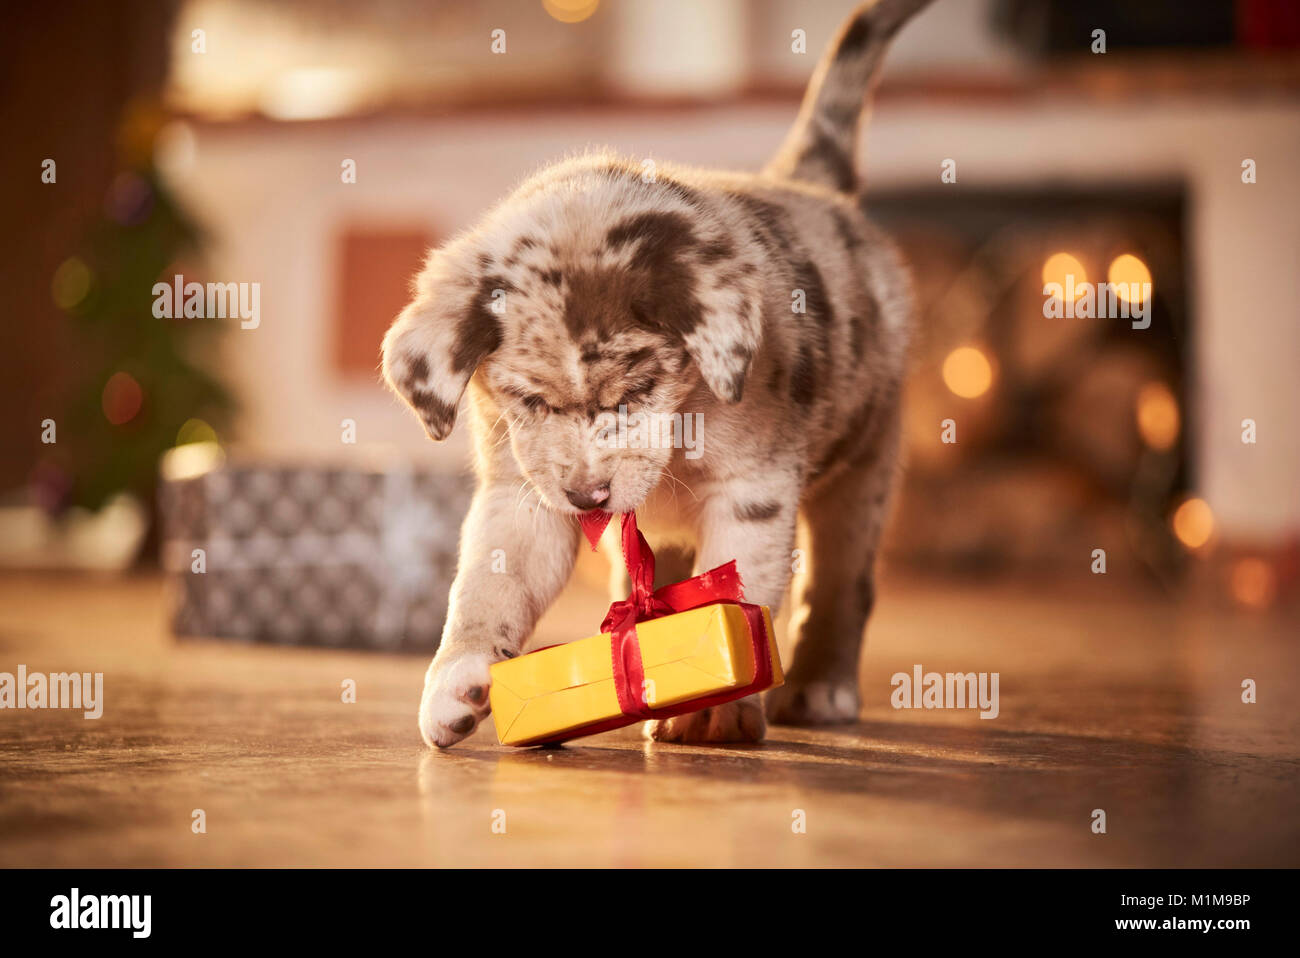 Mixed-breed dog. Puppy in a room decorated for Christmas, playing with a gift. Germany. Stock Photo